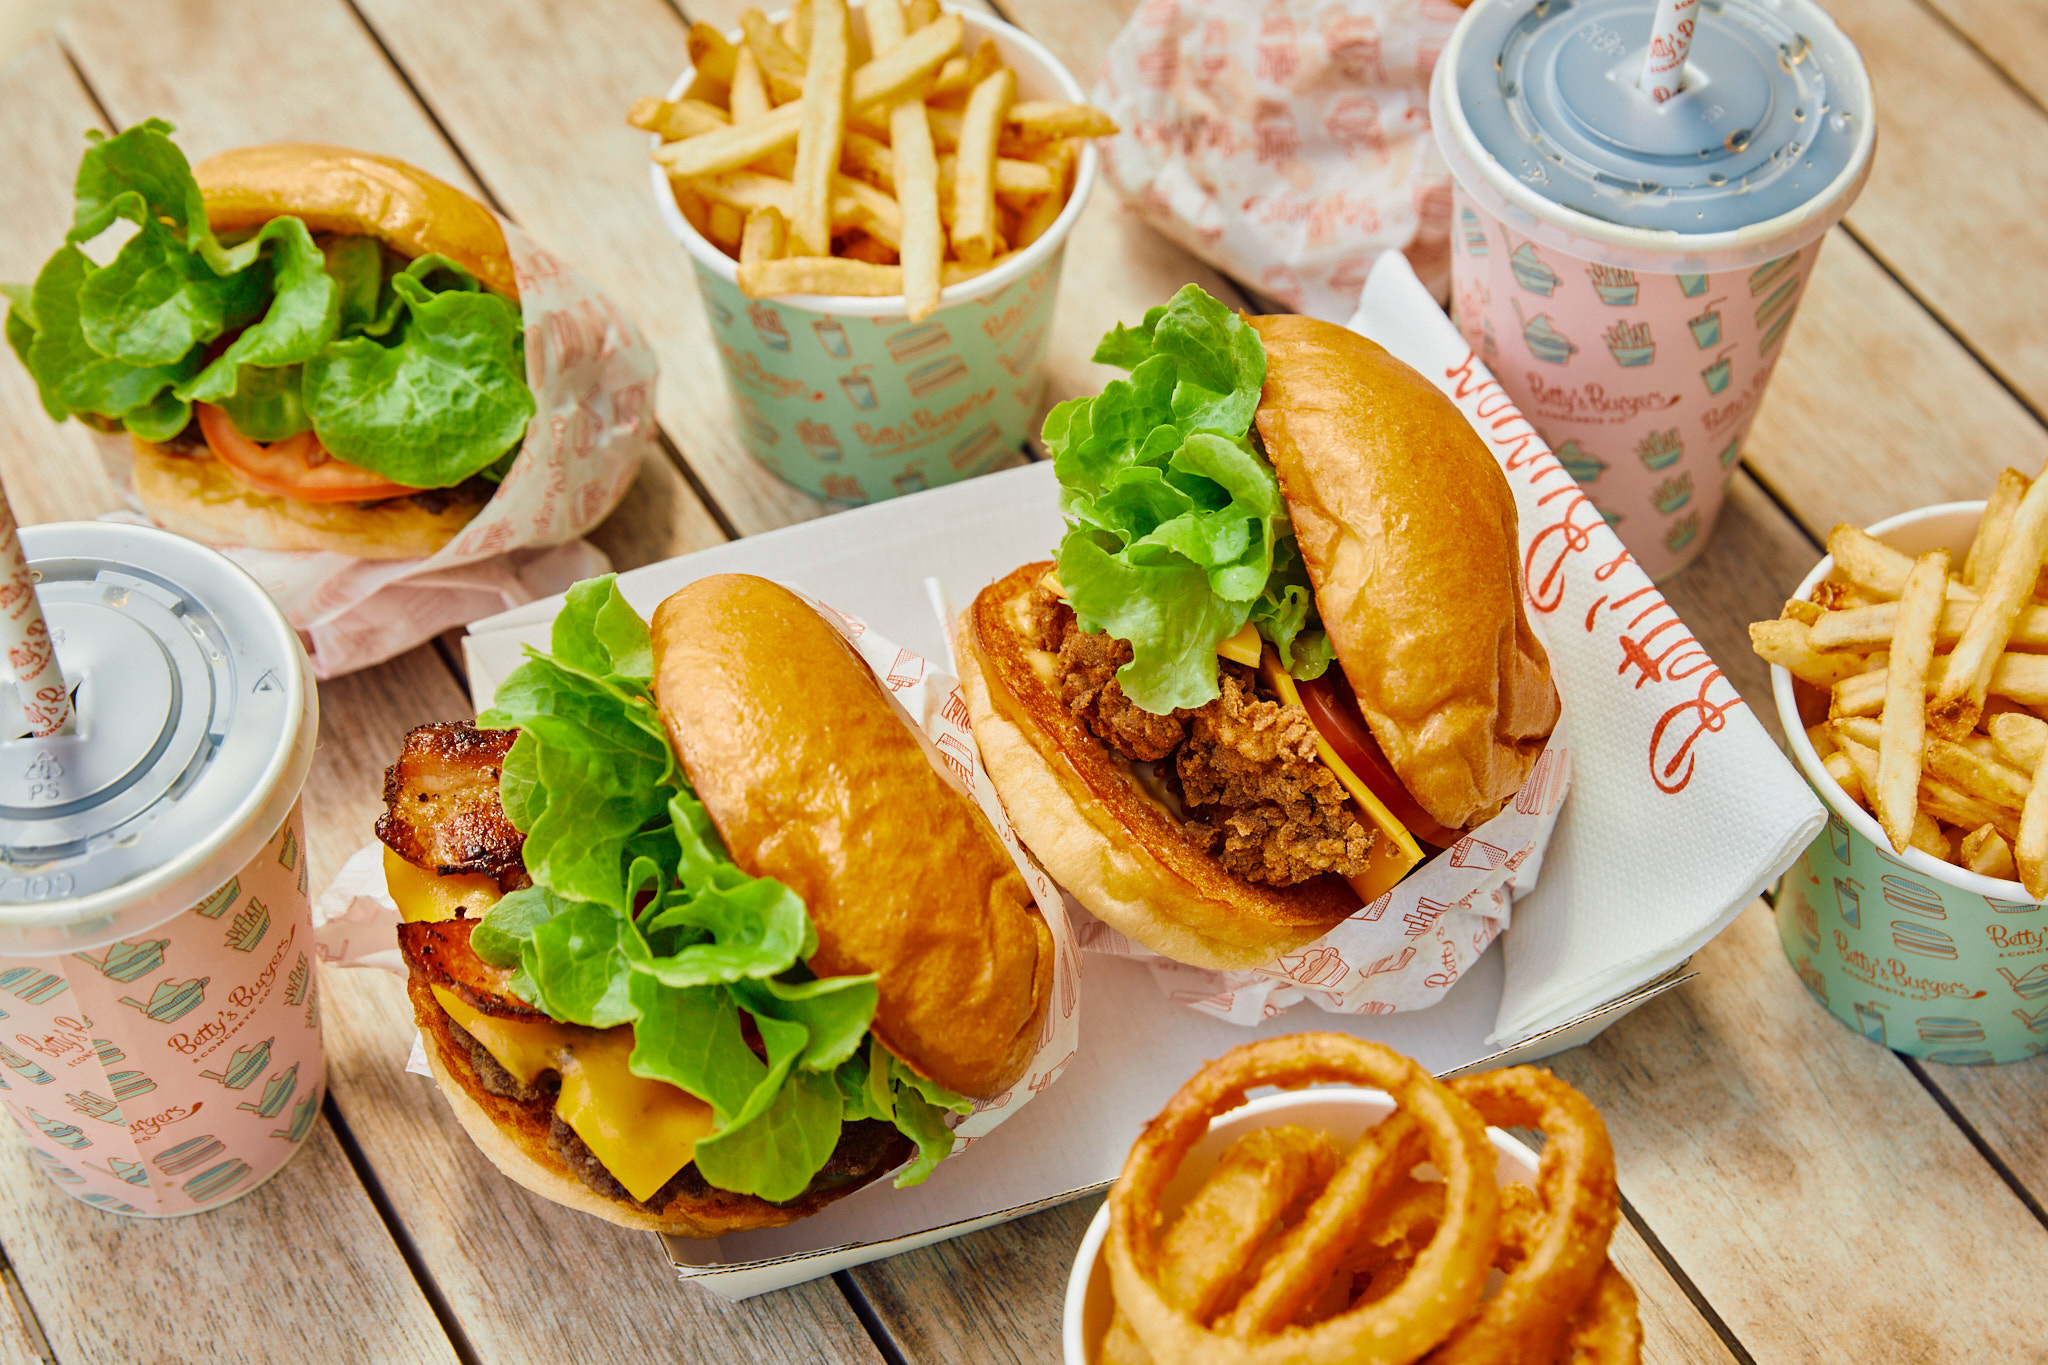 WIN a $200 dining app credit to spend at Betty’s Burgers!